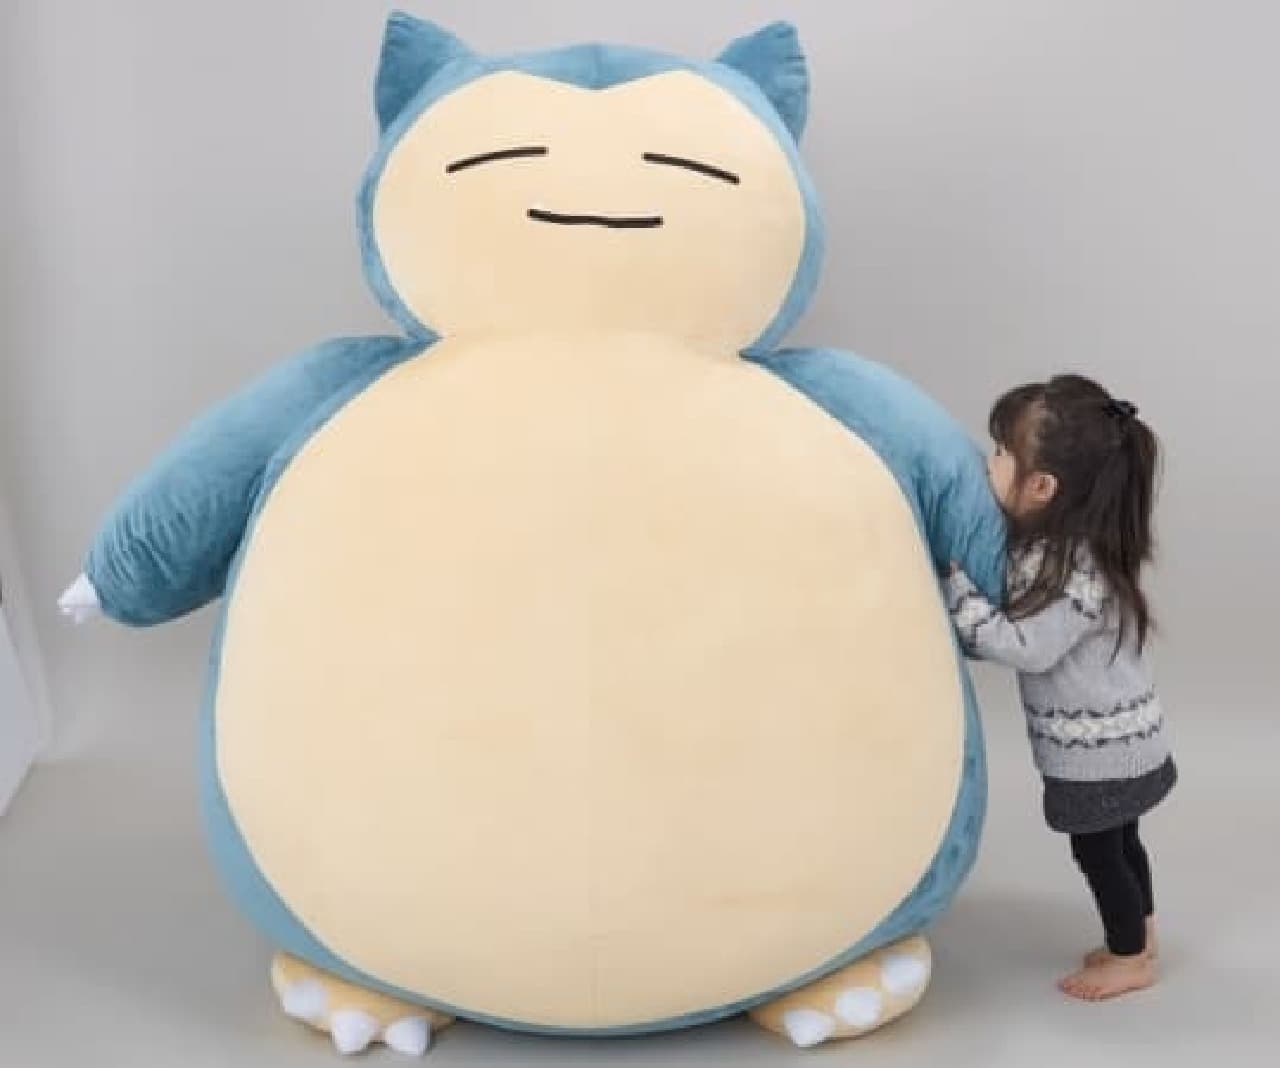 "Are you Snorlax?"